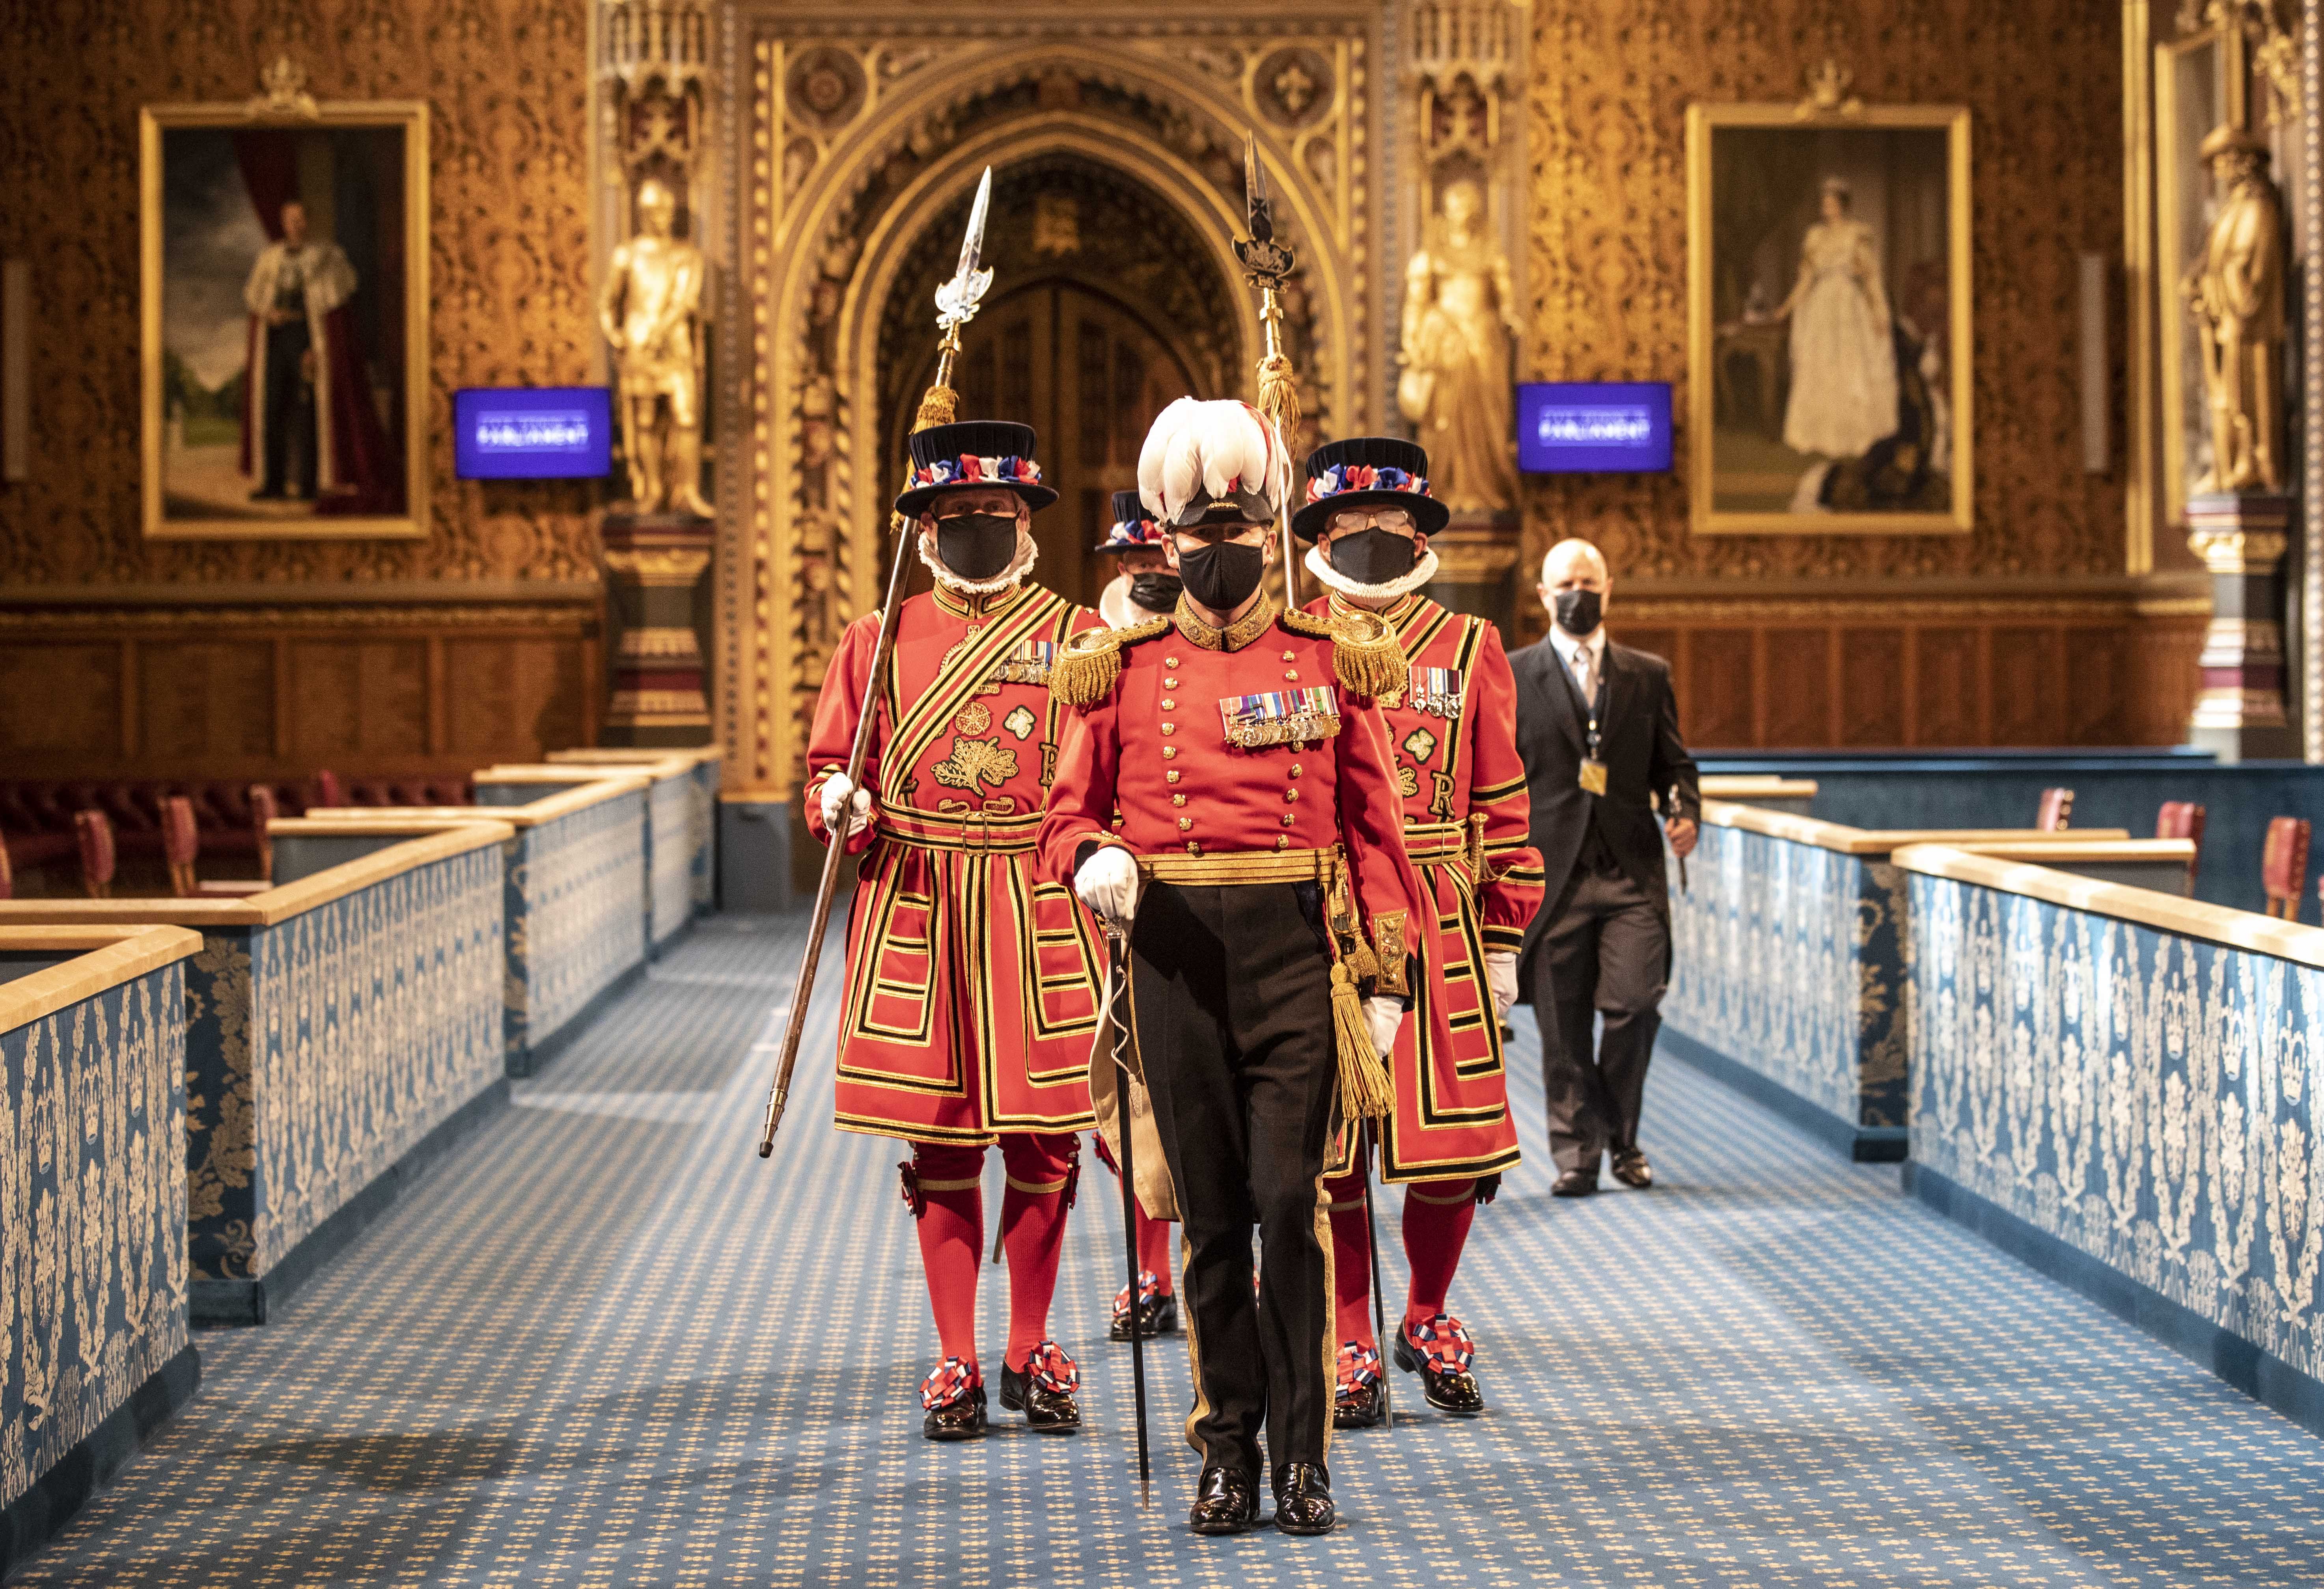 A photo of Yeoman standing in parliament while wearing masks.